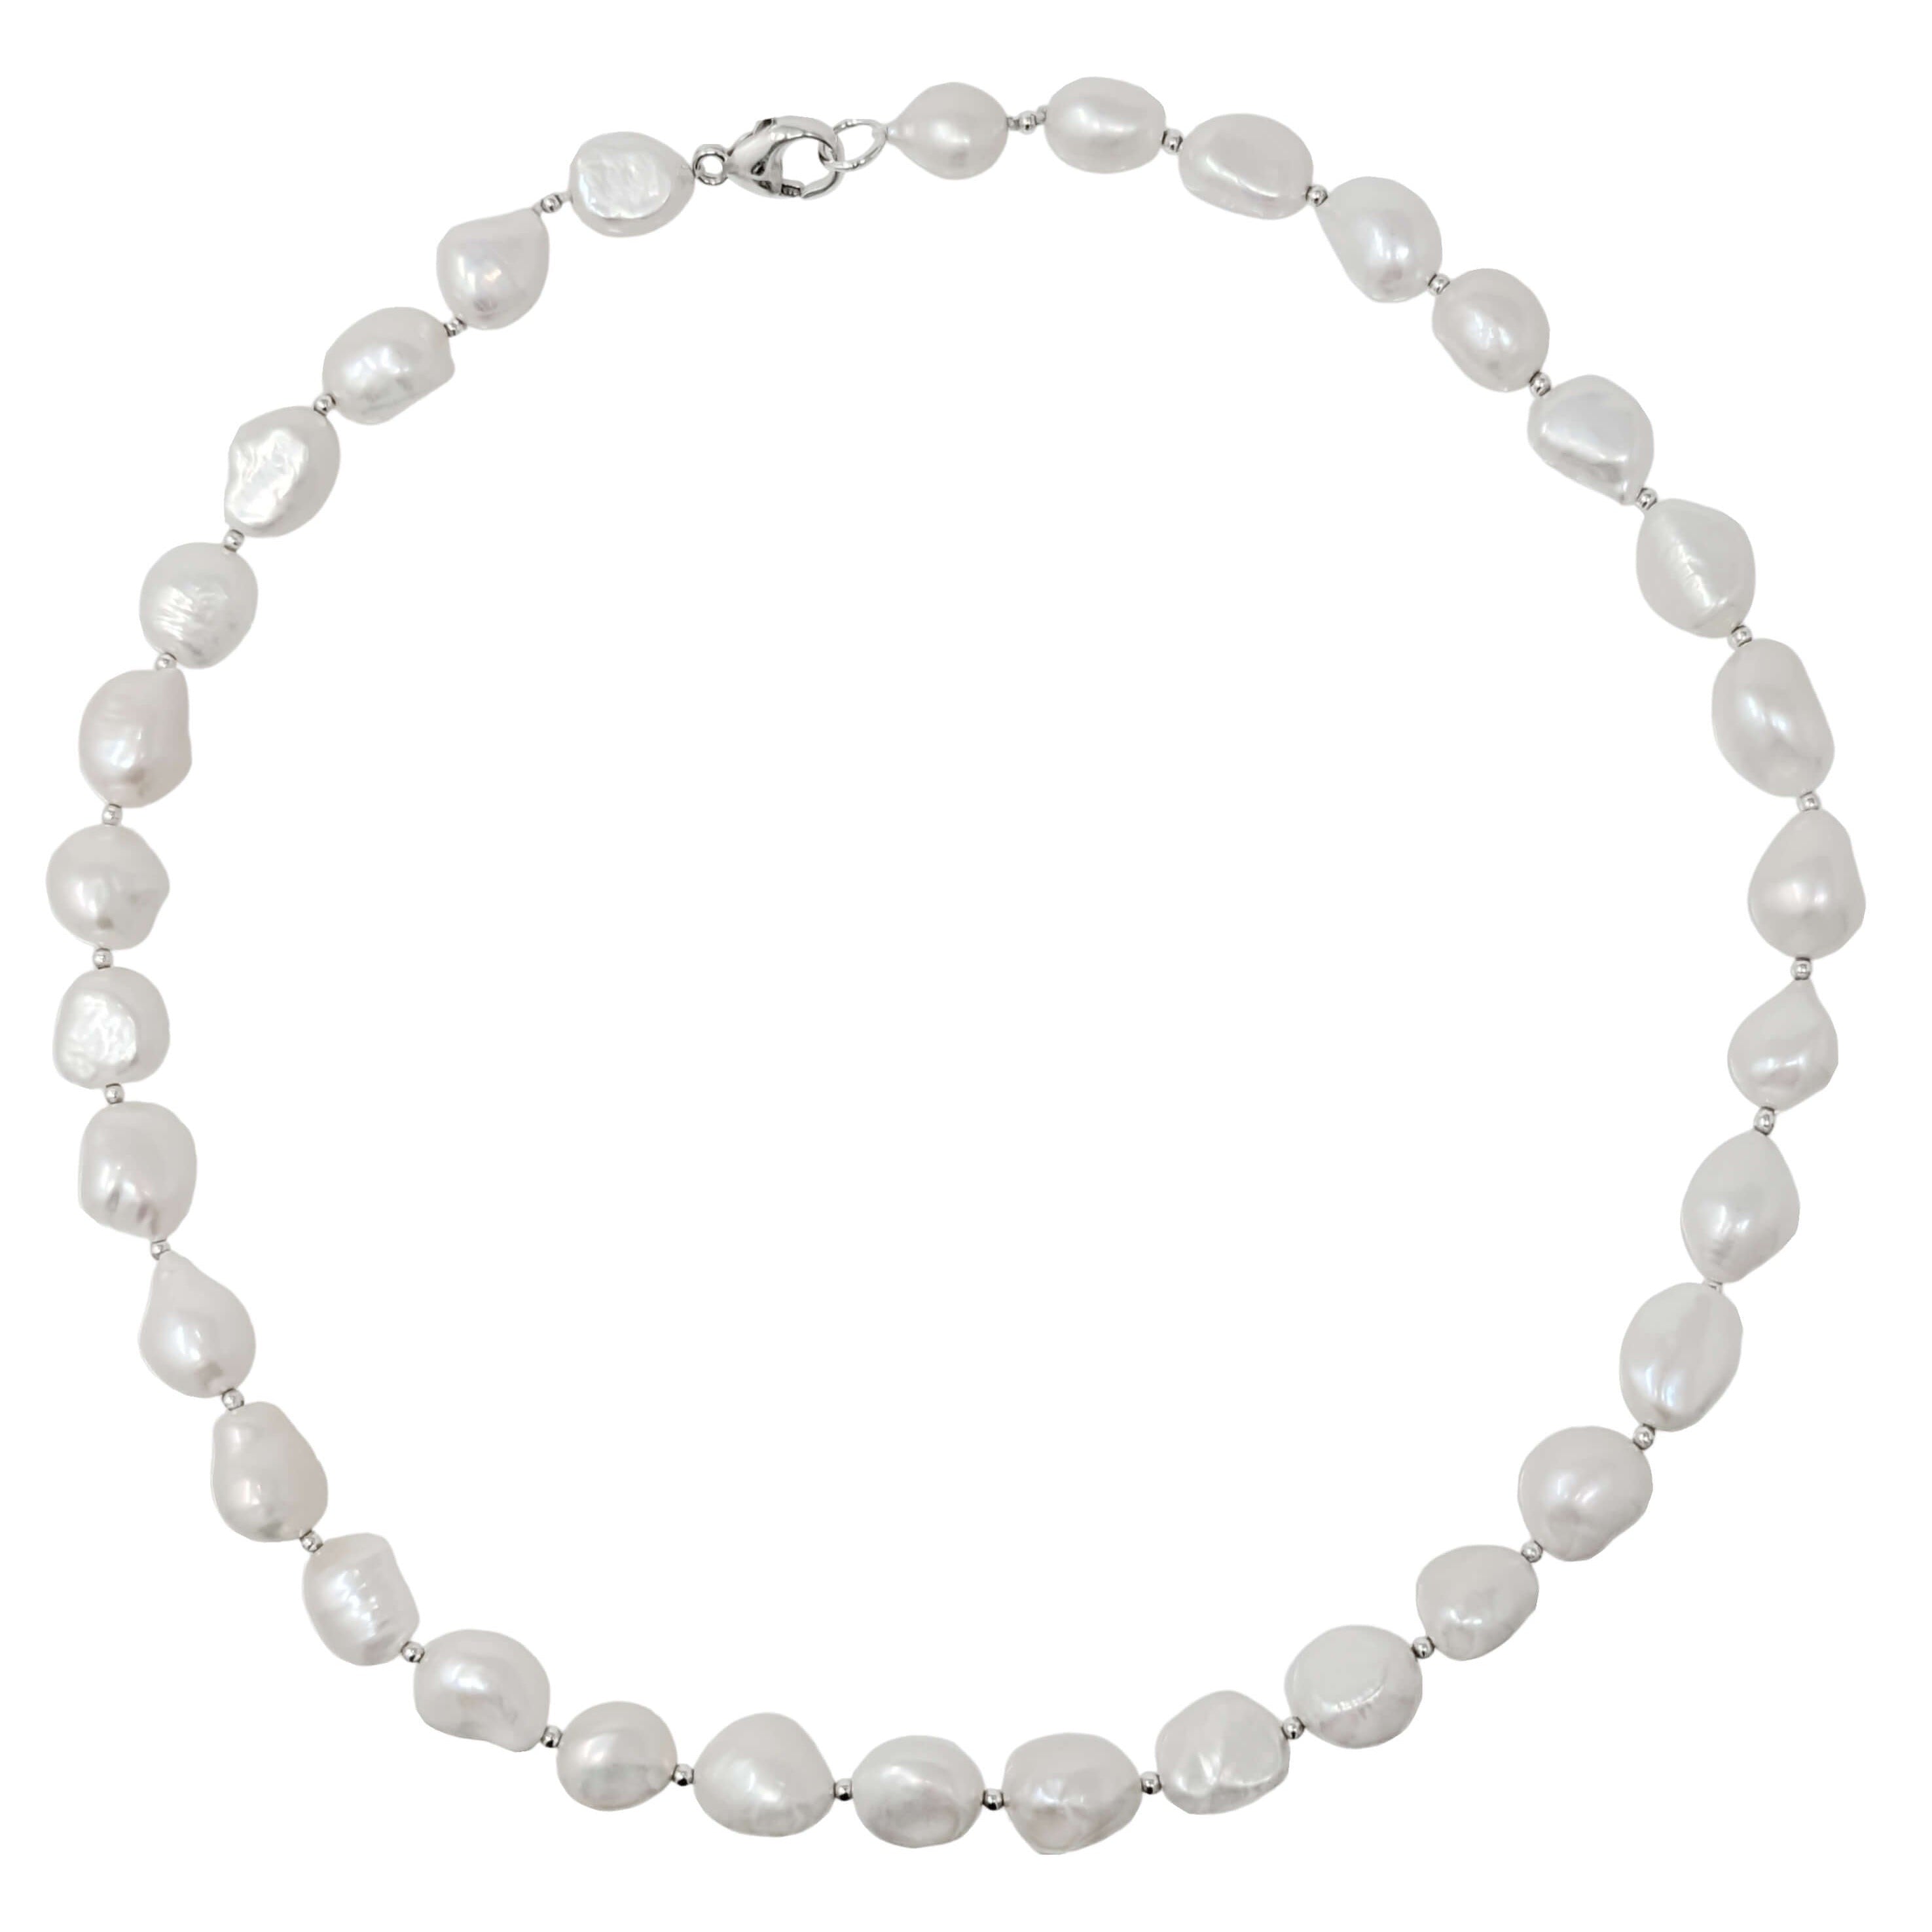 chunky baroque pearl necklace in sterling silver on white background